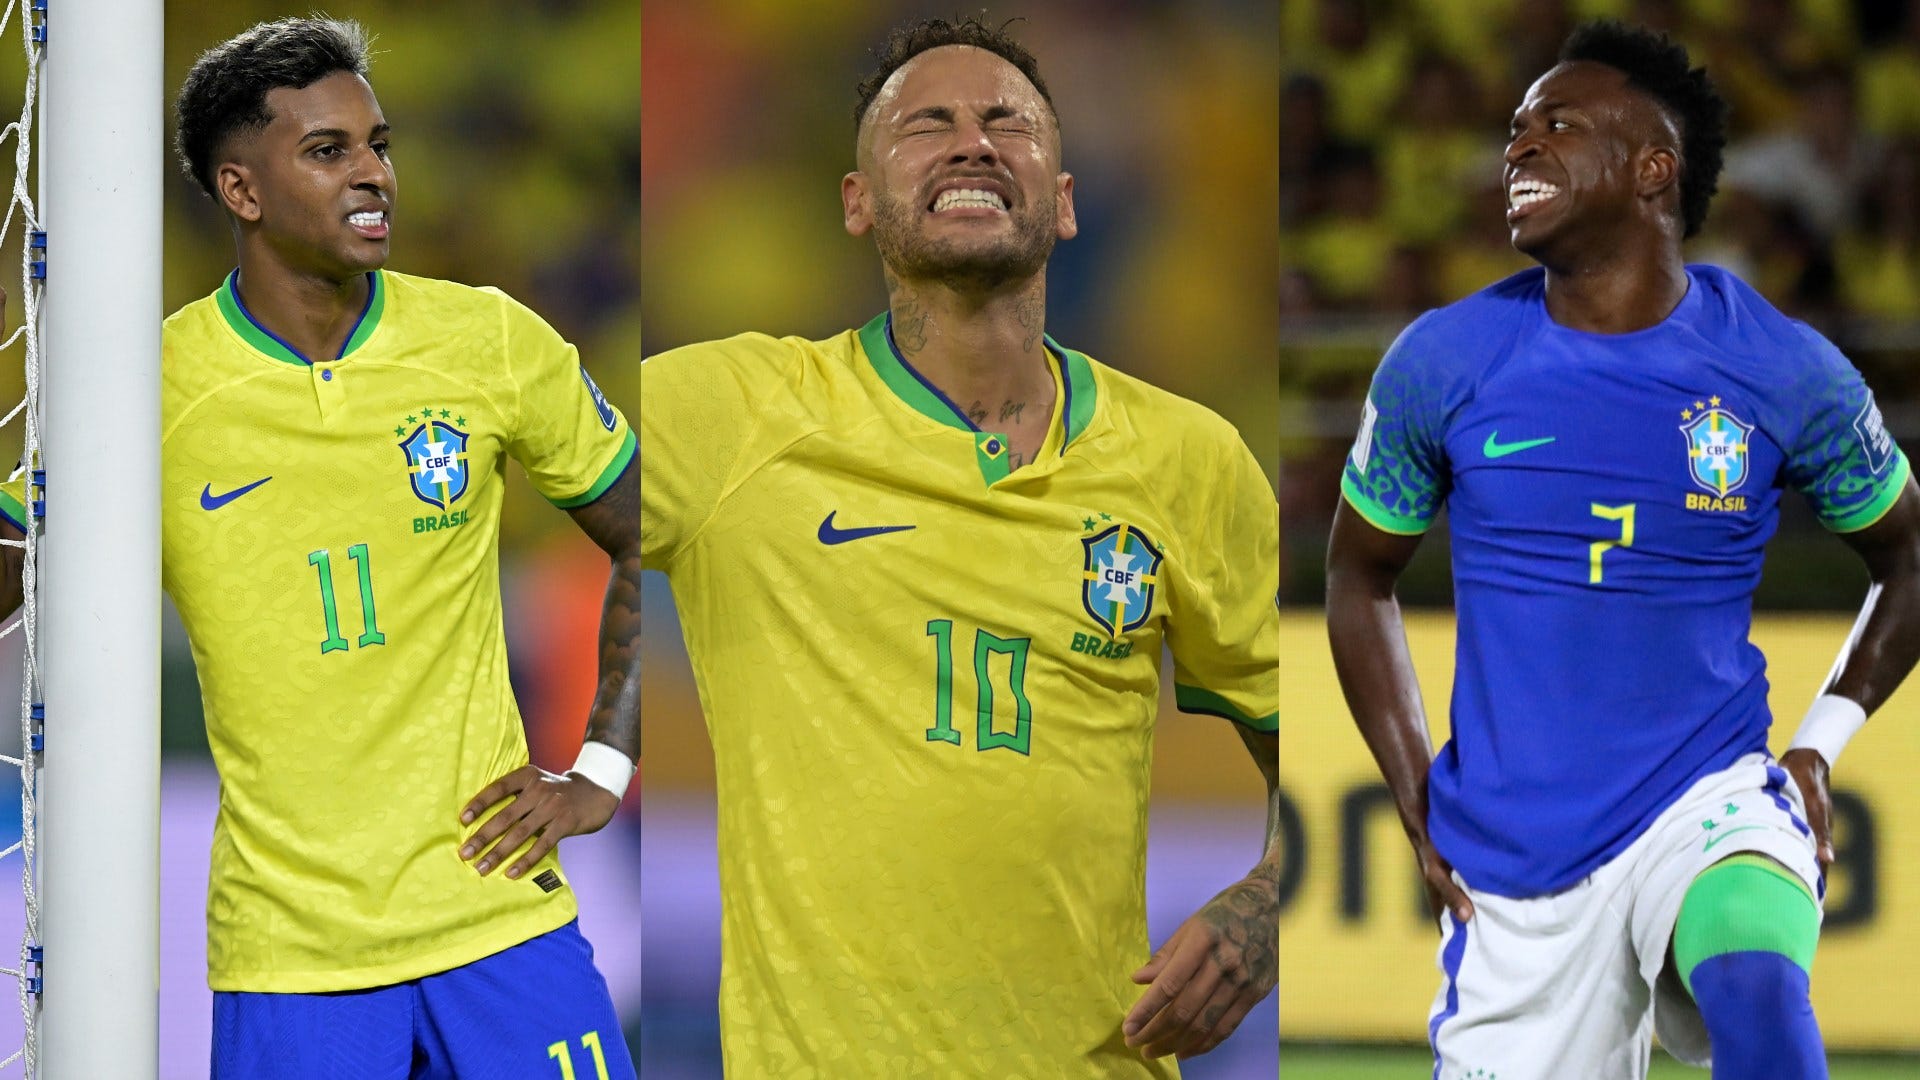 Brazil’s 2026 World Cup Dream in Limbo due to Injuries to Neymar and Vinicius Jr.